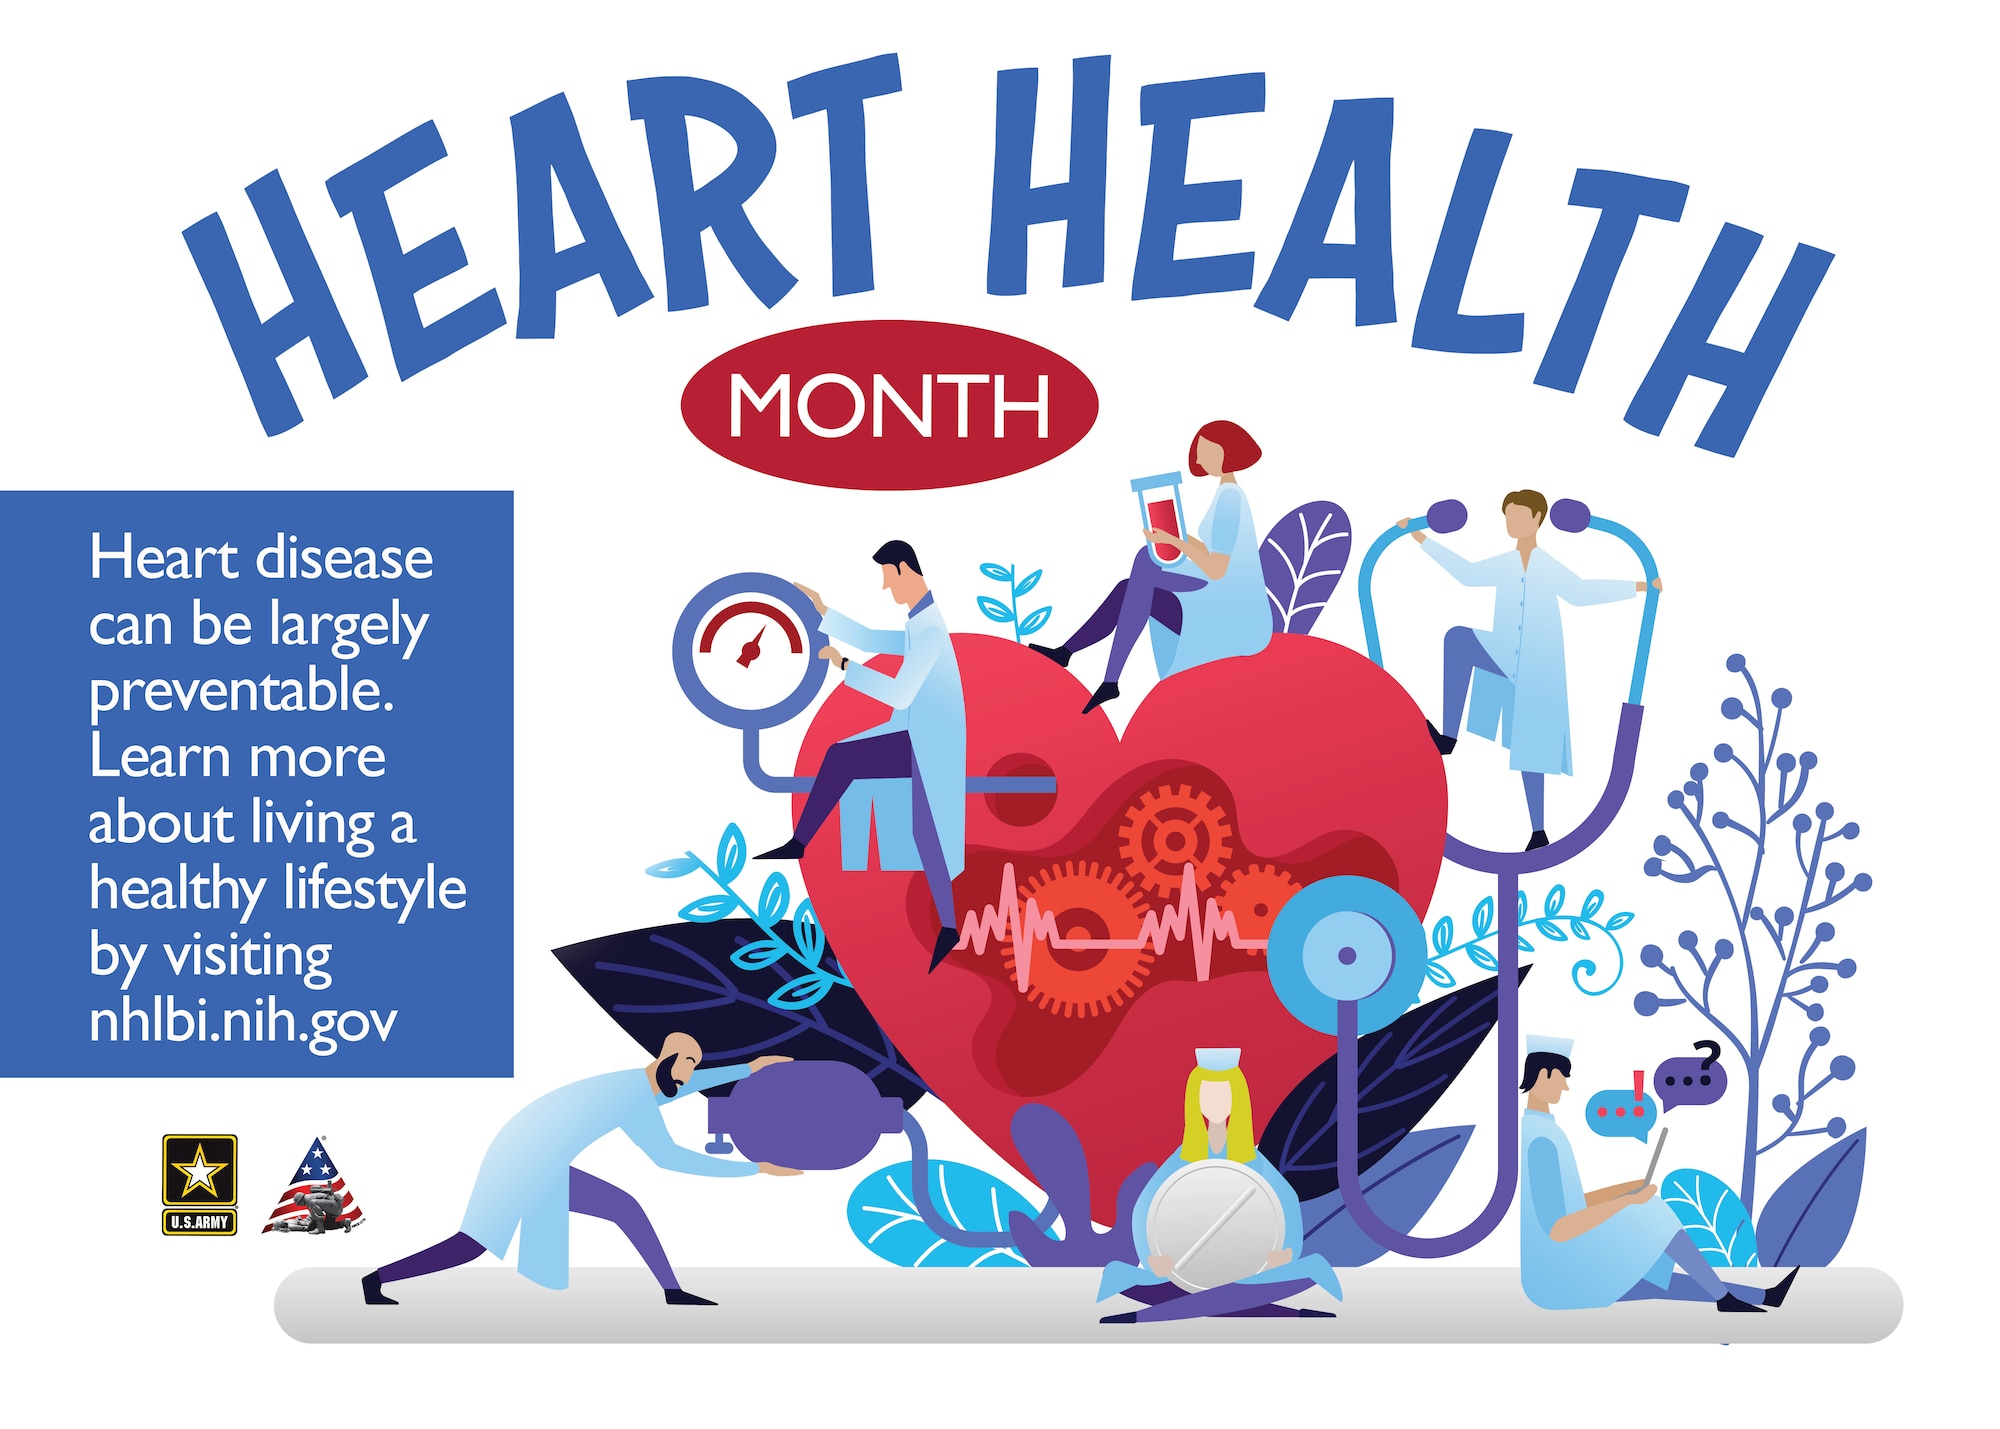 February is Heart Health Awareness month which was established in December of 1963 to bring awareness of heart disease. The National Heart, Lung, and Blood Institute can help provide information that can assist individuals looking for ways to prevent heart disease. (U.S. Army graphic by Rebecca Westfall)